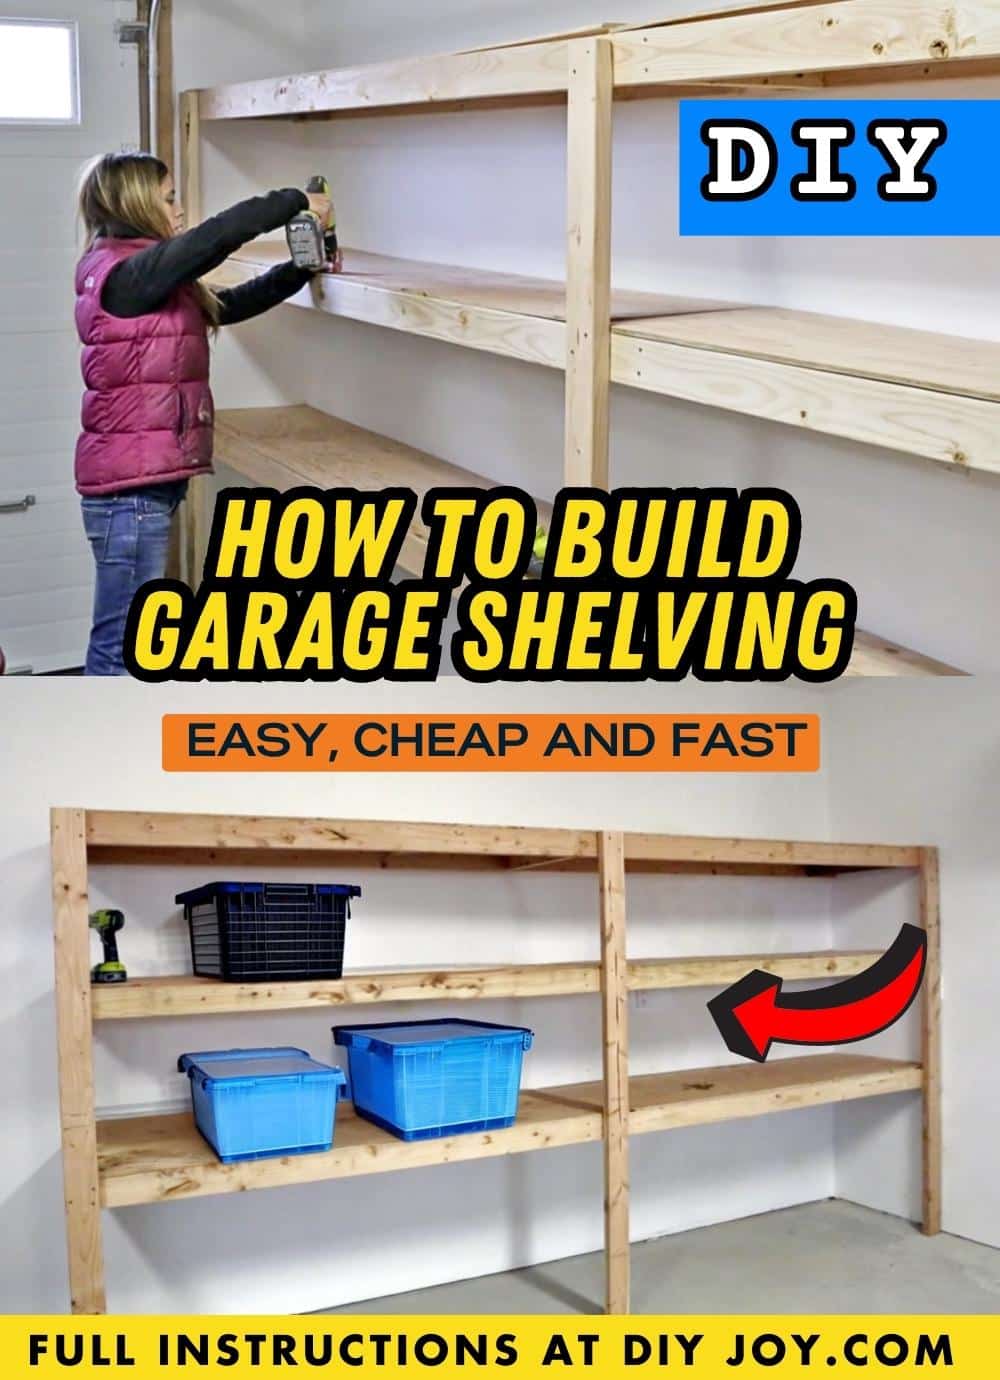 How to Build Garage Shelving (Easy, Cheap, and Fast)